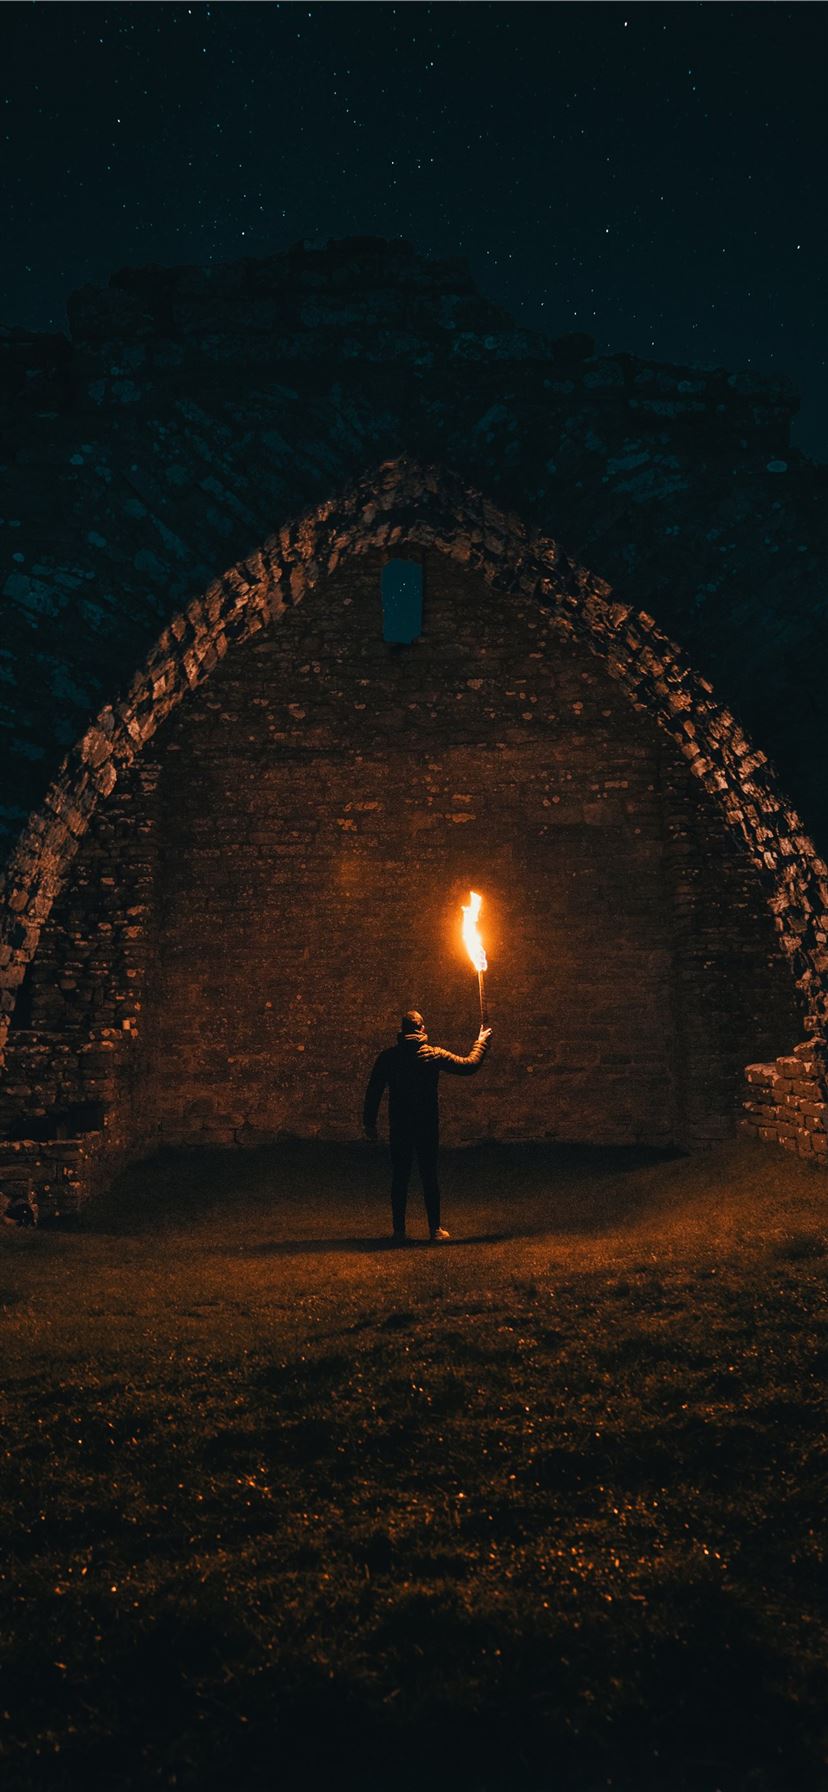 person holding torch in building interior iPhone 11 wallpaper 